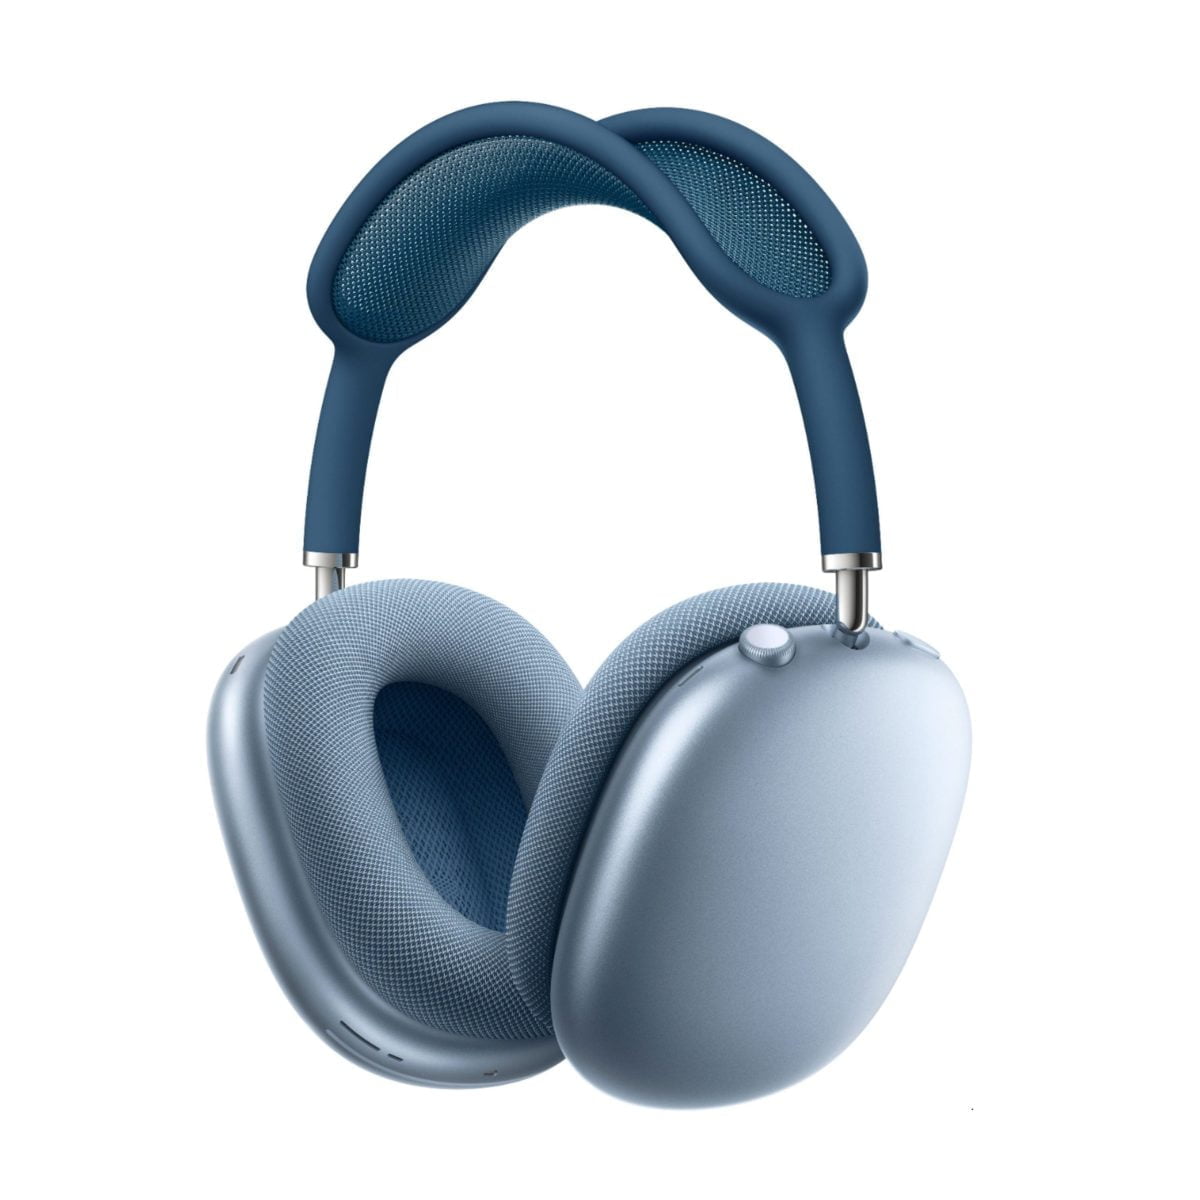 6376542Cv11D 1 Scaled Apple &Lt;H1&Gt;Apple Airpods Max - Sky Blue With Blue Headband - Mgyl3&Lt;/H1&Gt; &Lt;Div Class=&Quot;Long-Description-Container Body-Copy &Quot;&Gt; &Lt;Div Class=&Quot;Product-Description&Quot;&Gt;Airpods Max Reimagine Over-Ear Headphones. An Apple-Designed Dynamic Driver Provides Immersive High-Fidelity Audio. Every Detail, From Canopy To Cushions, Has Been Designed For An Exceptional Fit. Active Noise Cancellation Blocks Outside Noise, While Transparency Mode Lets It In. And Spatial Audio With Dynamic Head Tracking Provides Theater-Like Sound That Surrounds You.&Lt;/Div&Gt; &Lt;/Div&Gt; Apple Airpods Max Apple Airpods Max - Sky Blue With Blue Headband - Mgyl3